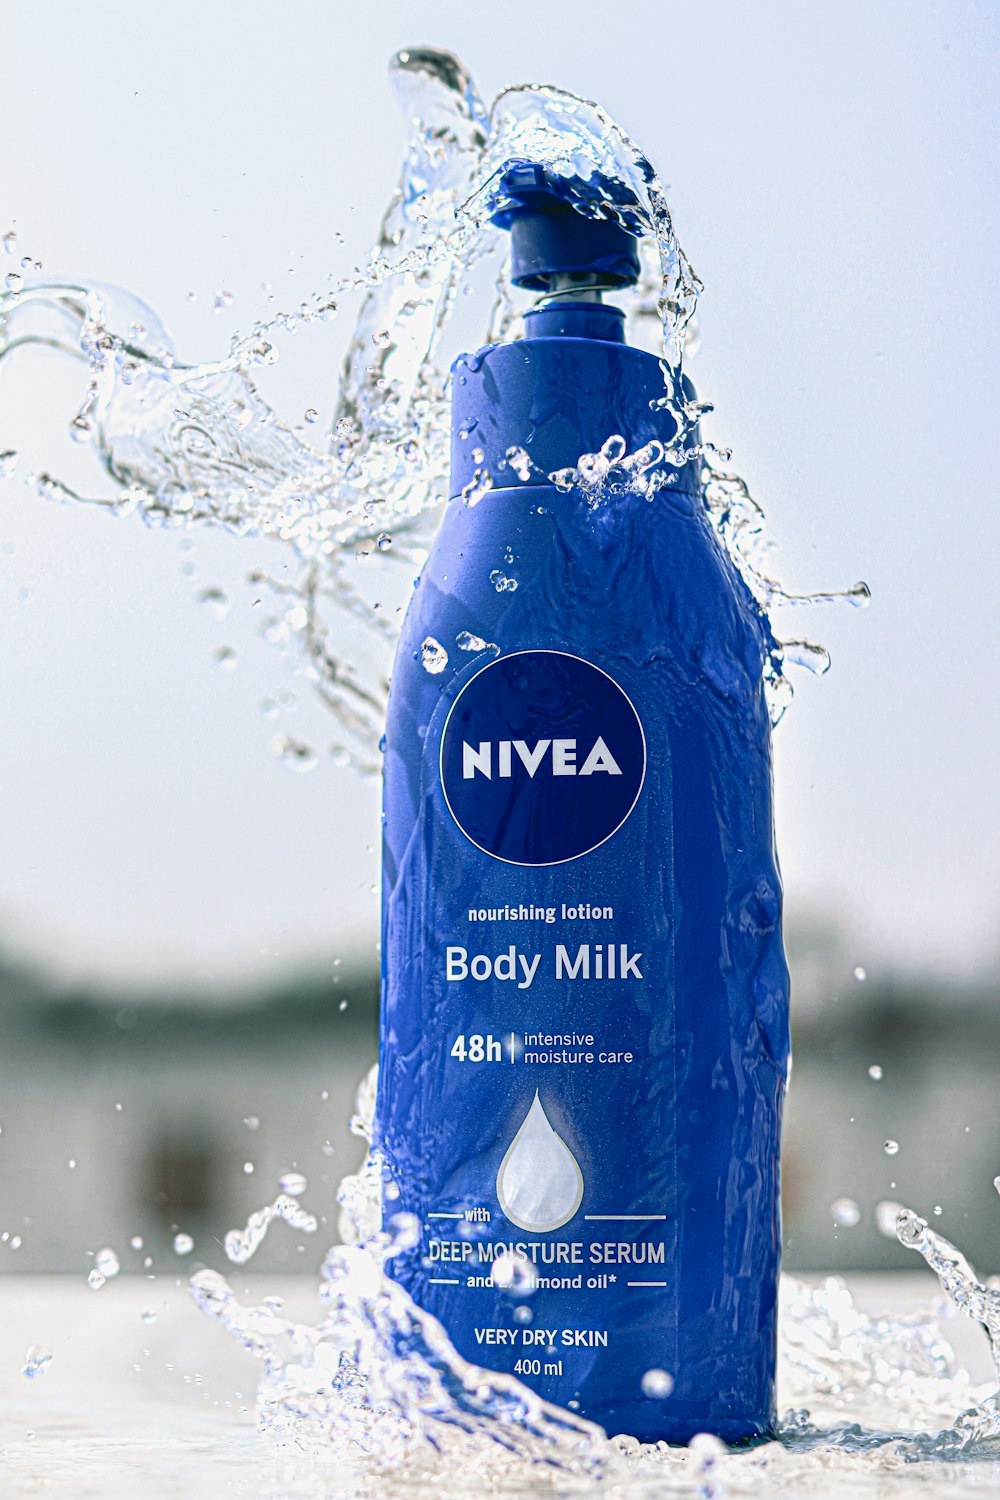 a bottle of nivea body milk splashing out of the water